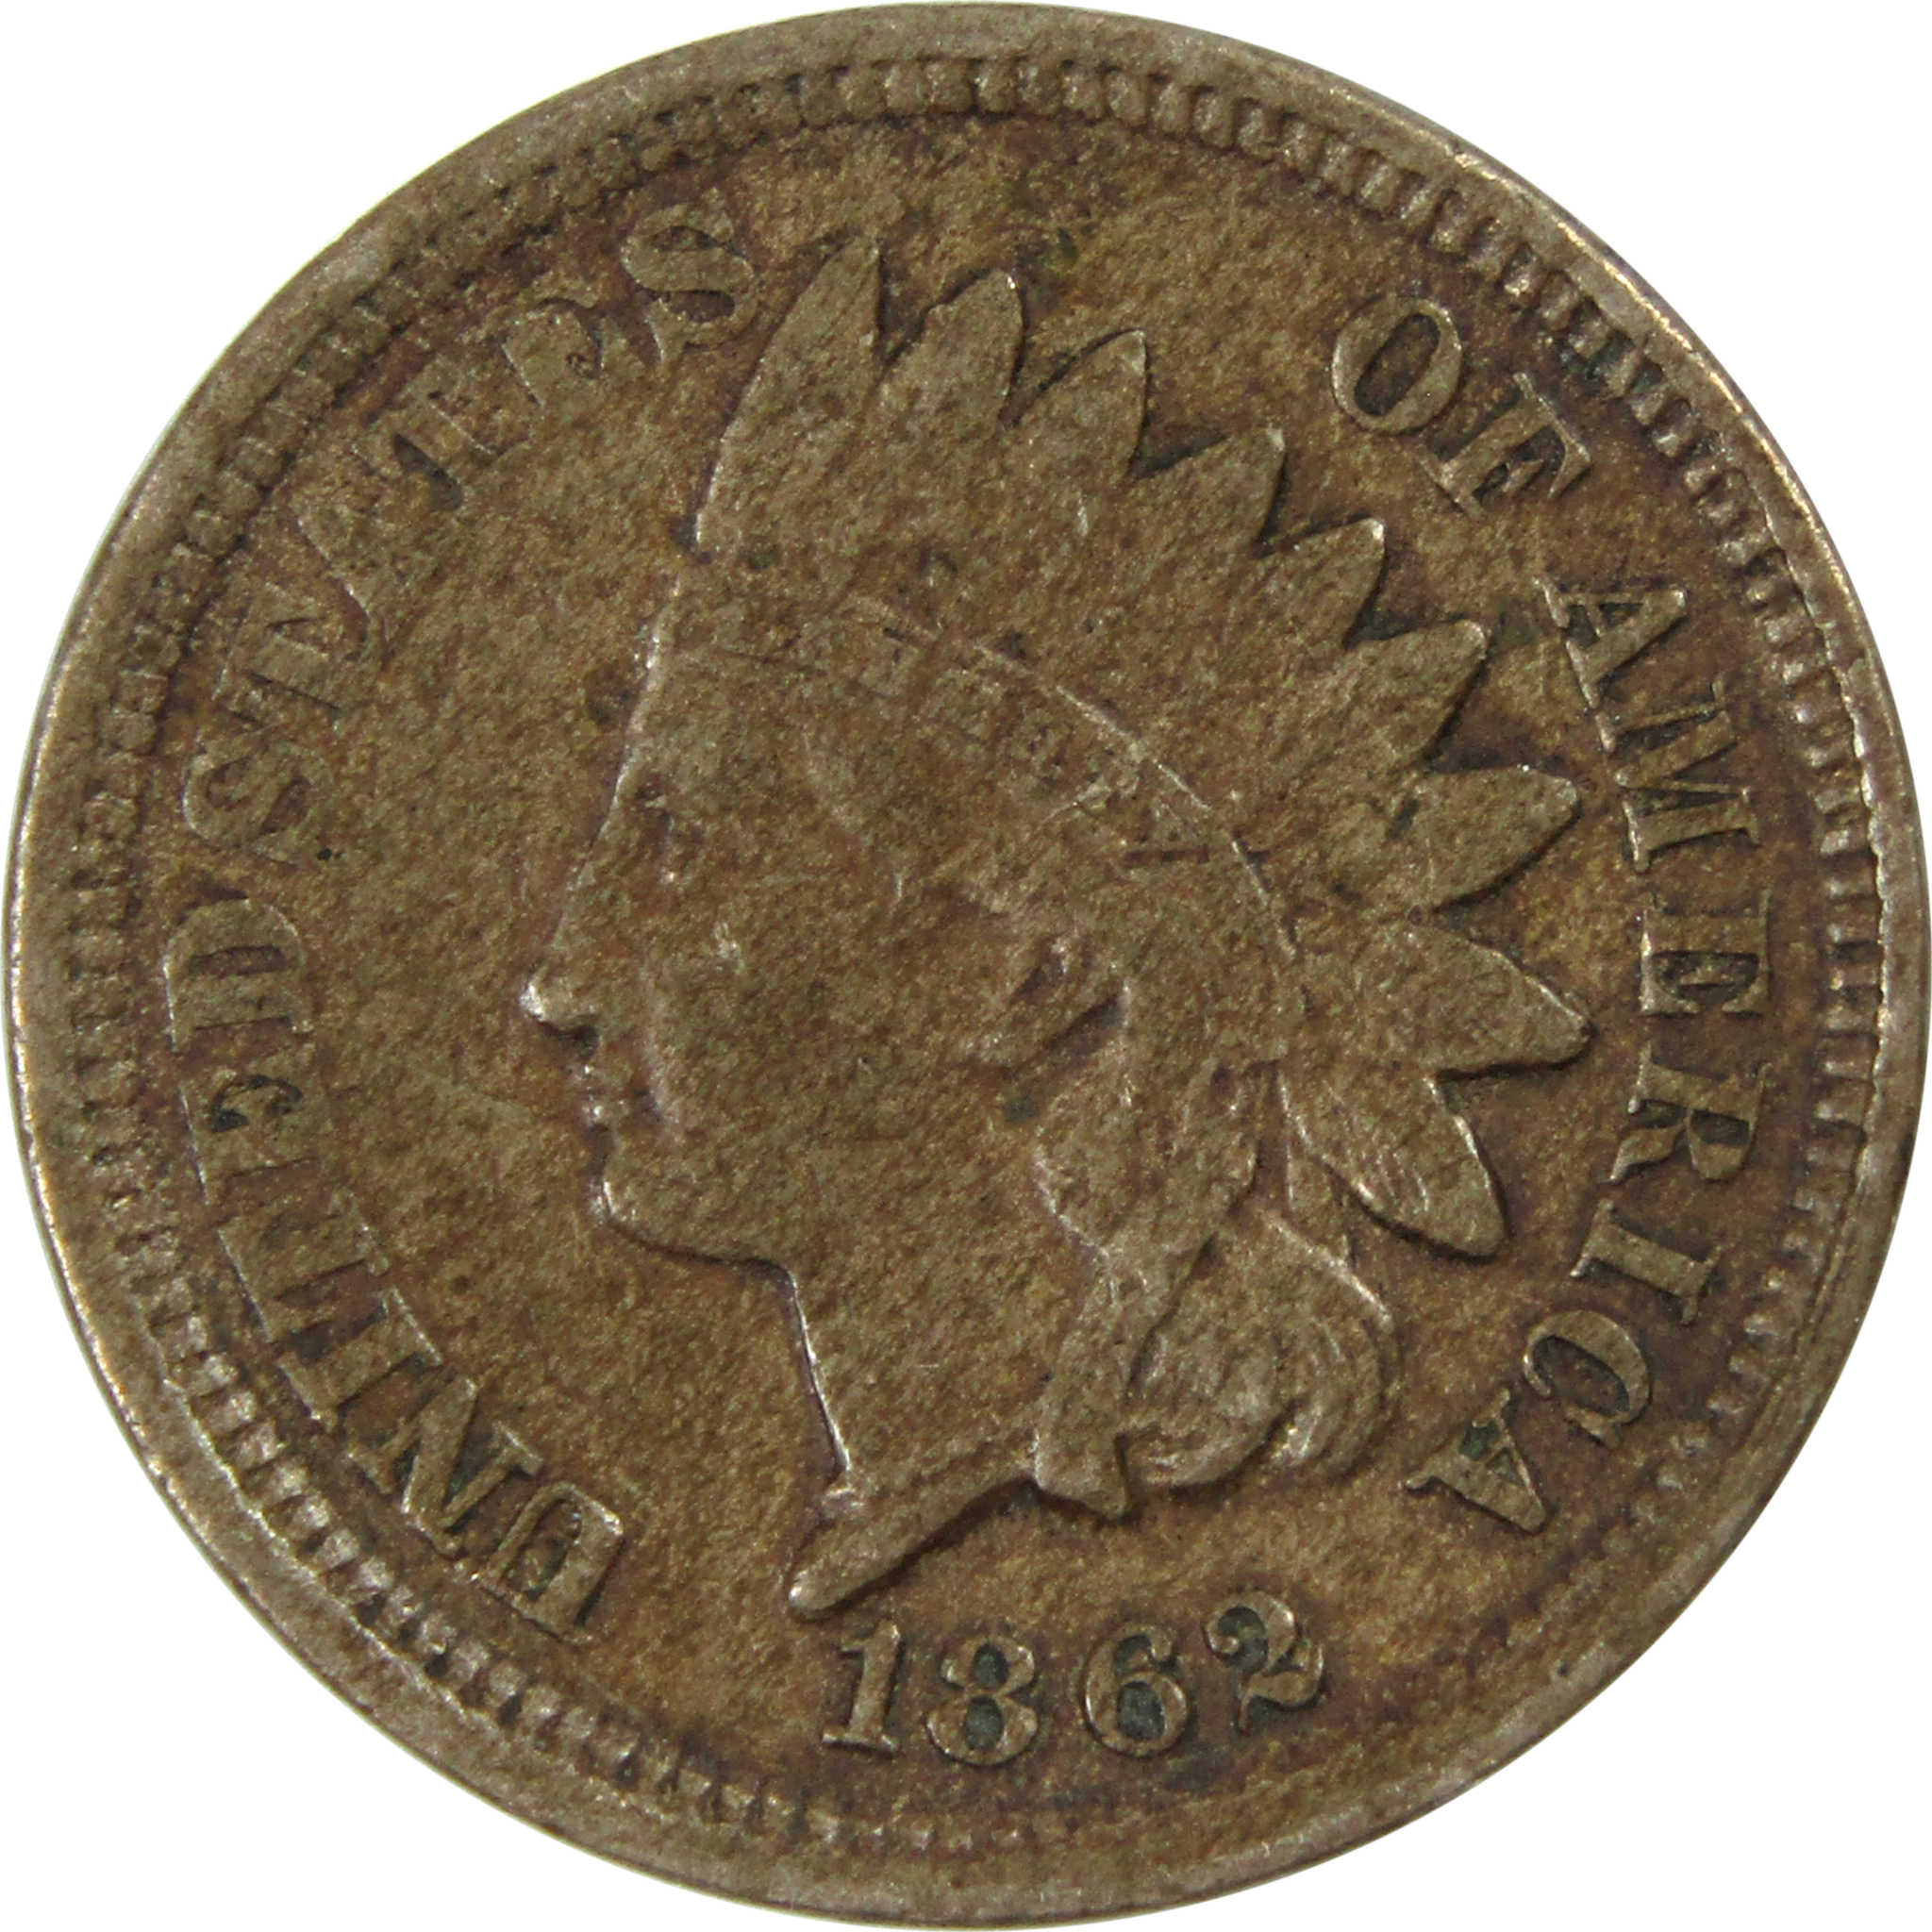 1862 Indian Head Cent XF EF Extremely Fine Copper-Nickel SKU:I13669